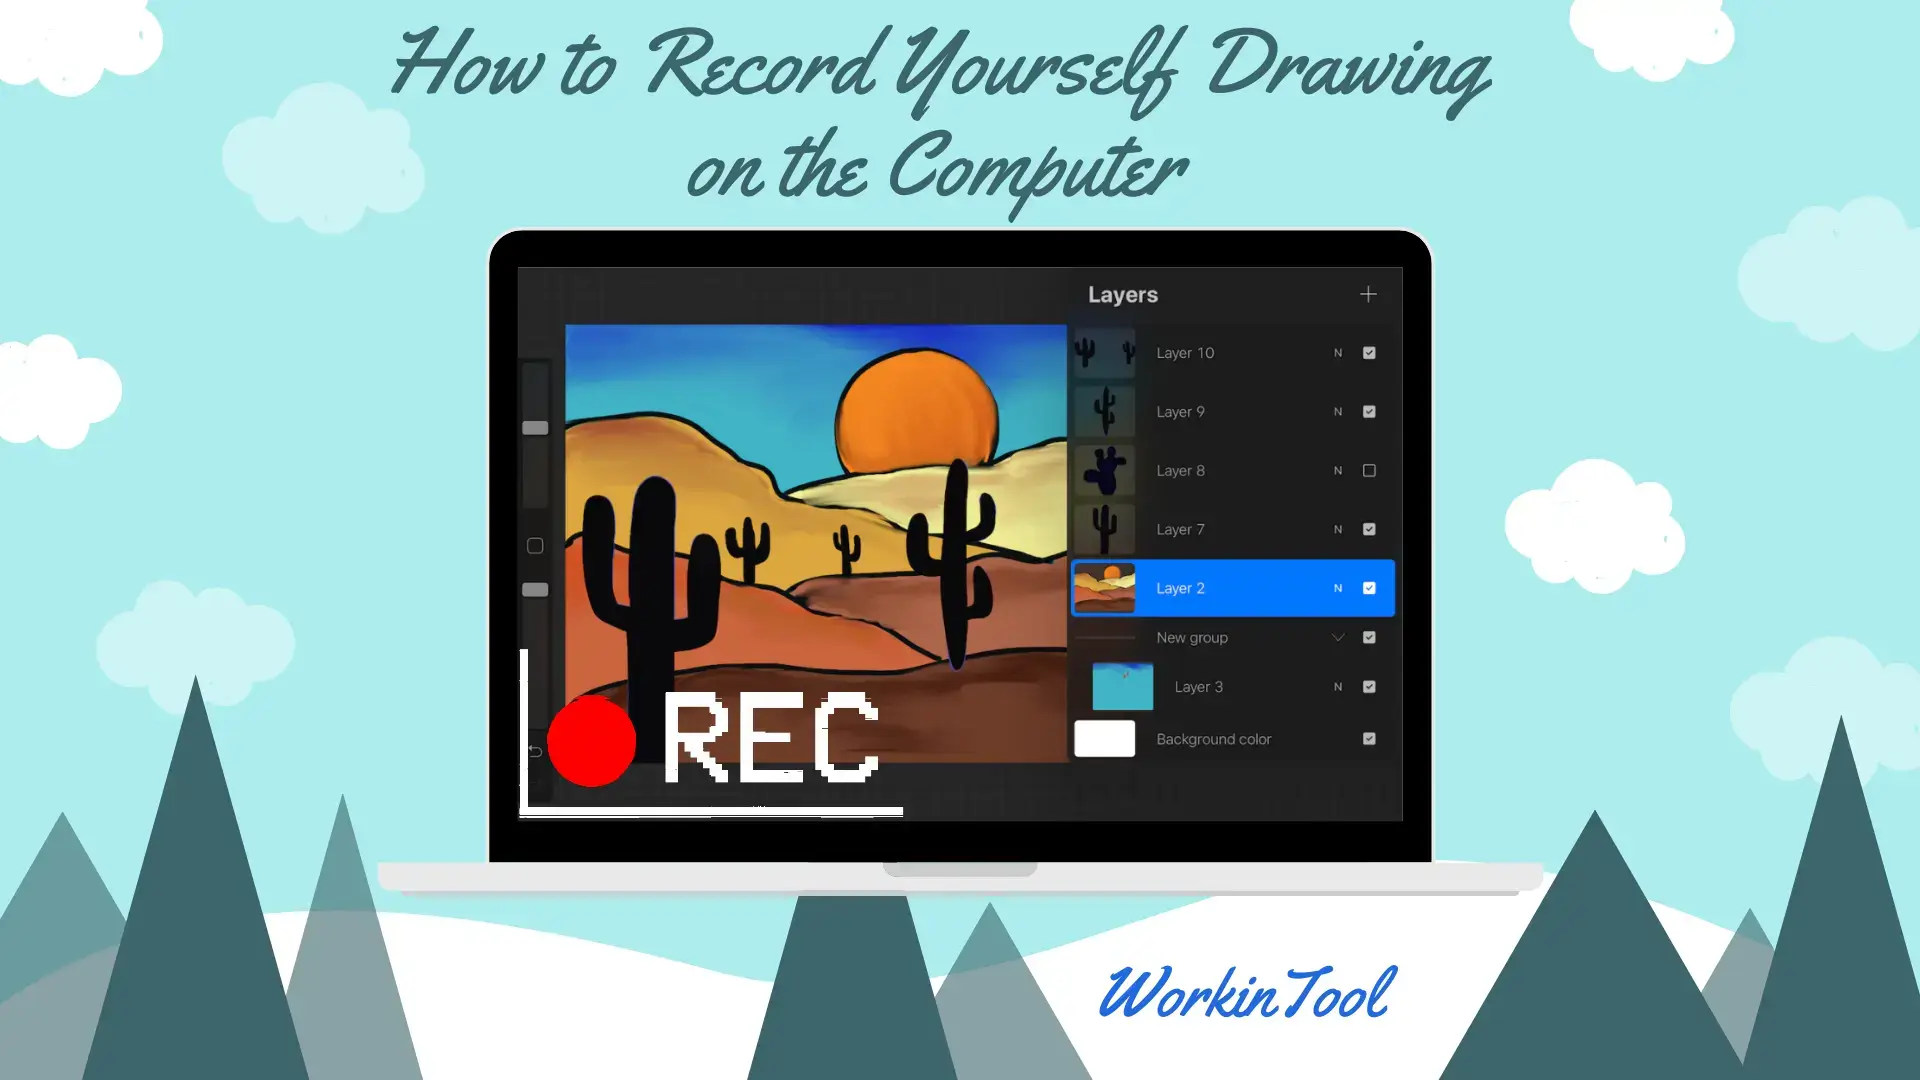 featured image for how to record yourself drawing on the computer